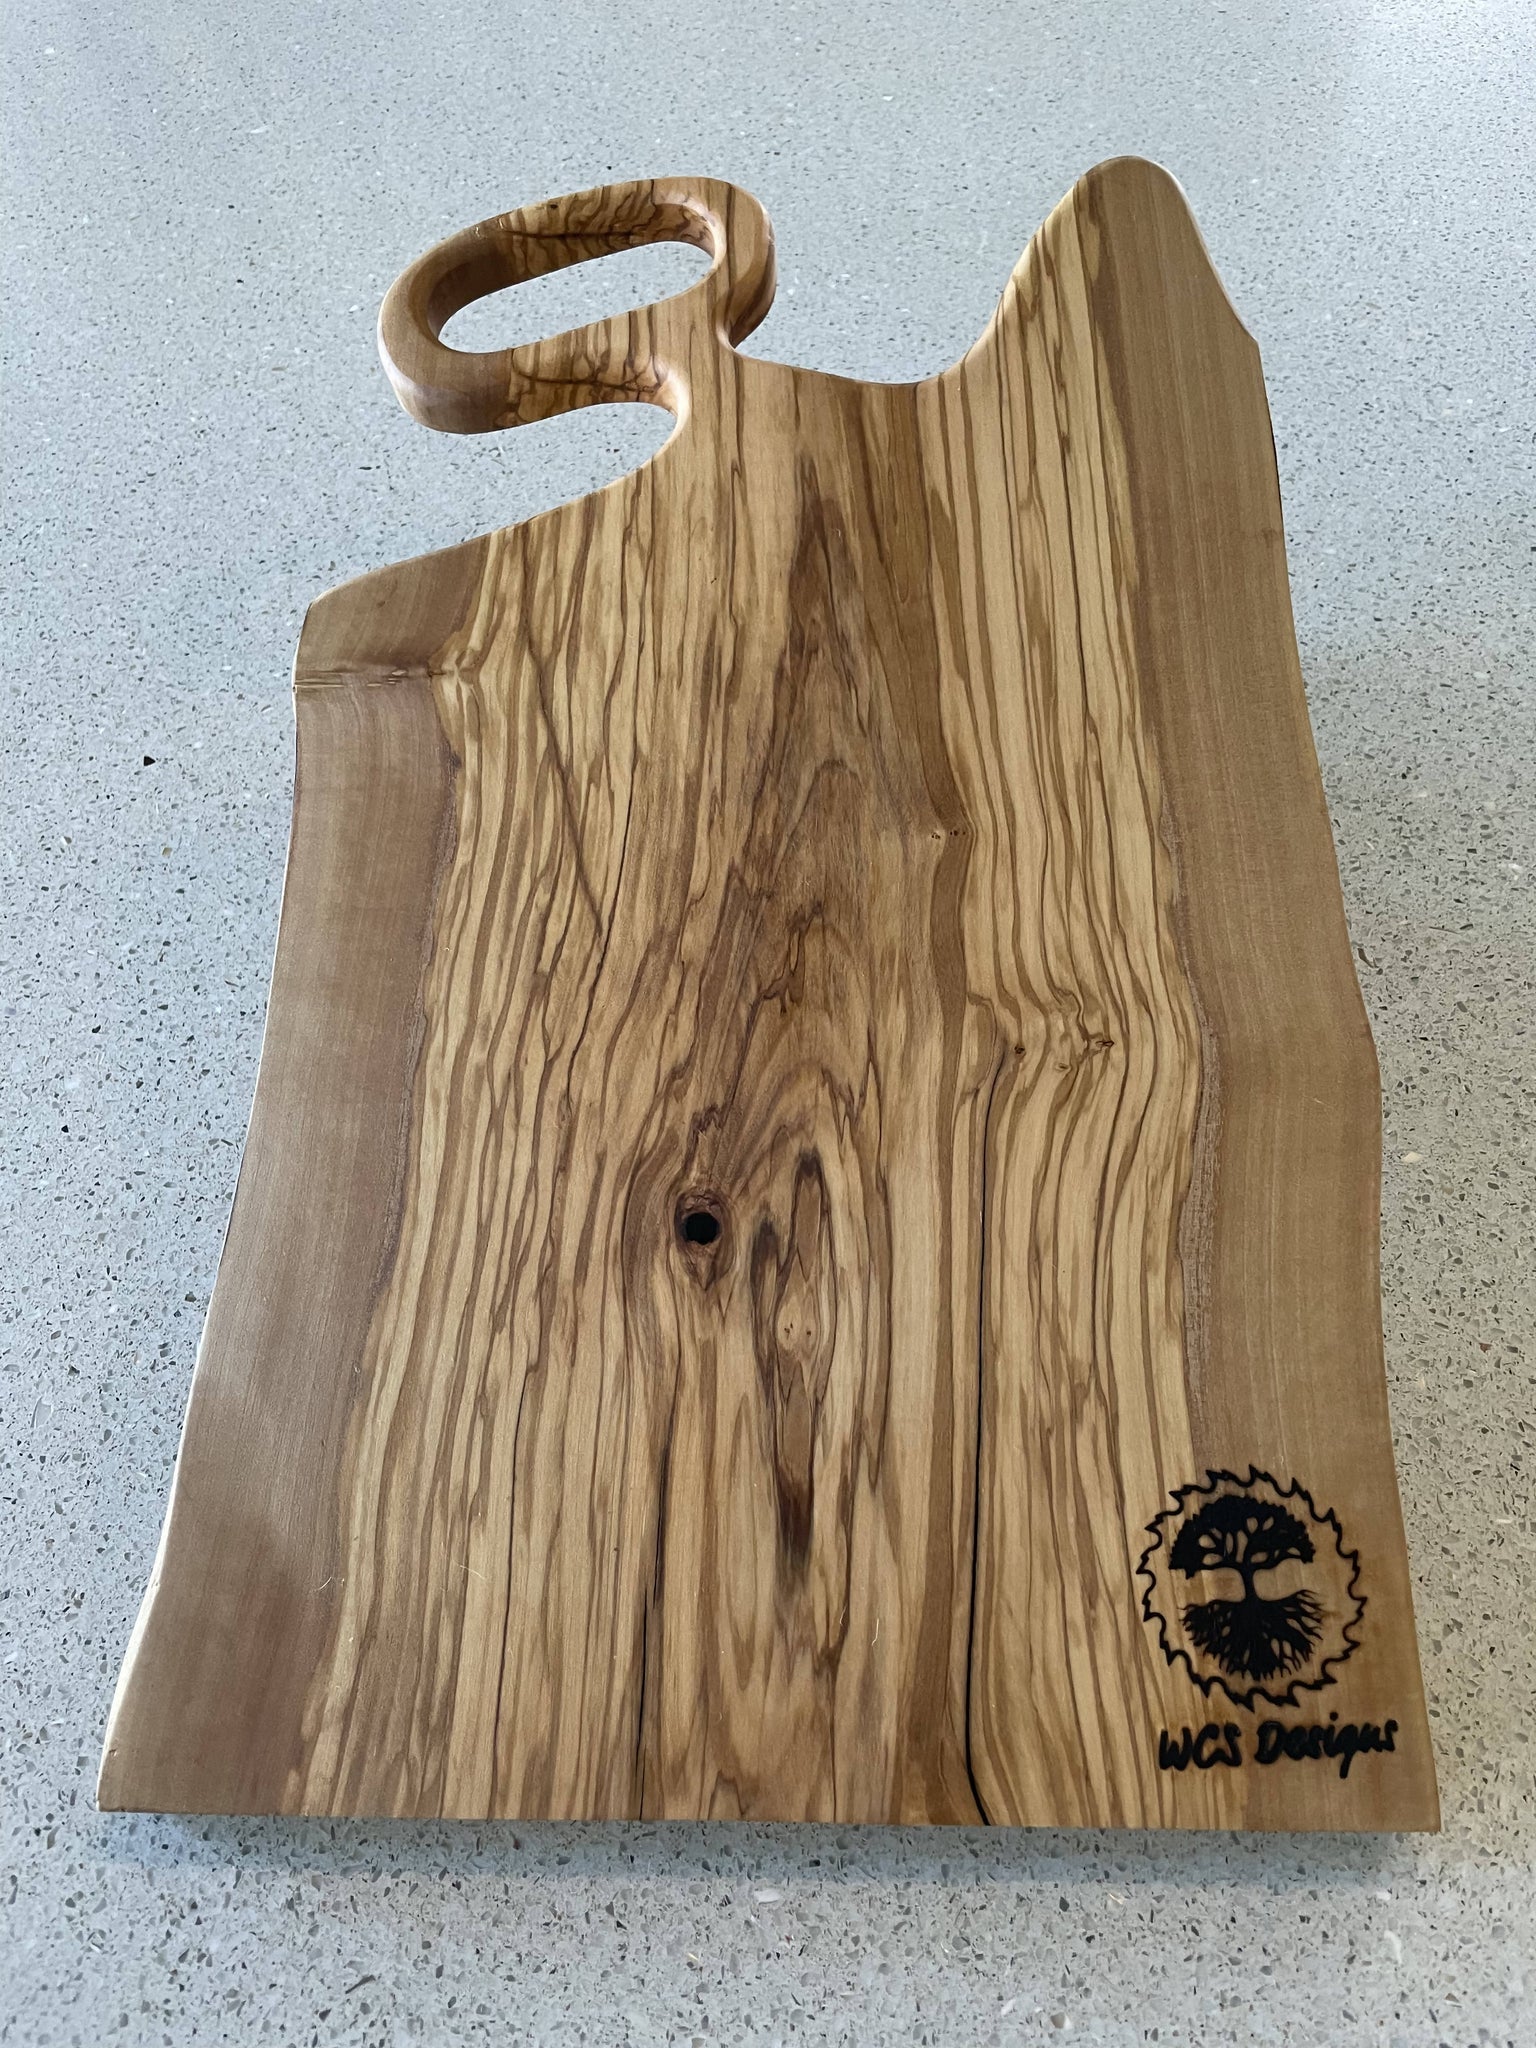 Natural Edge Cutting Board with Inlay